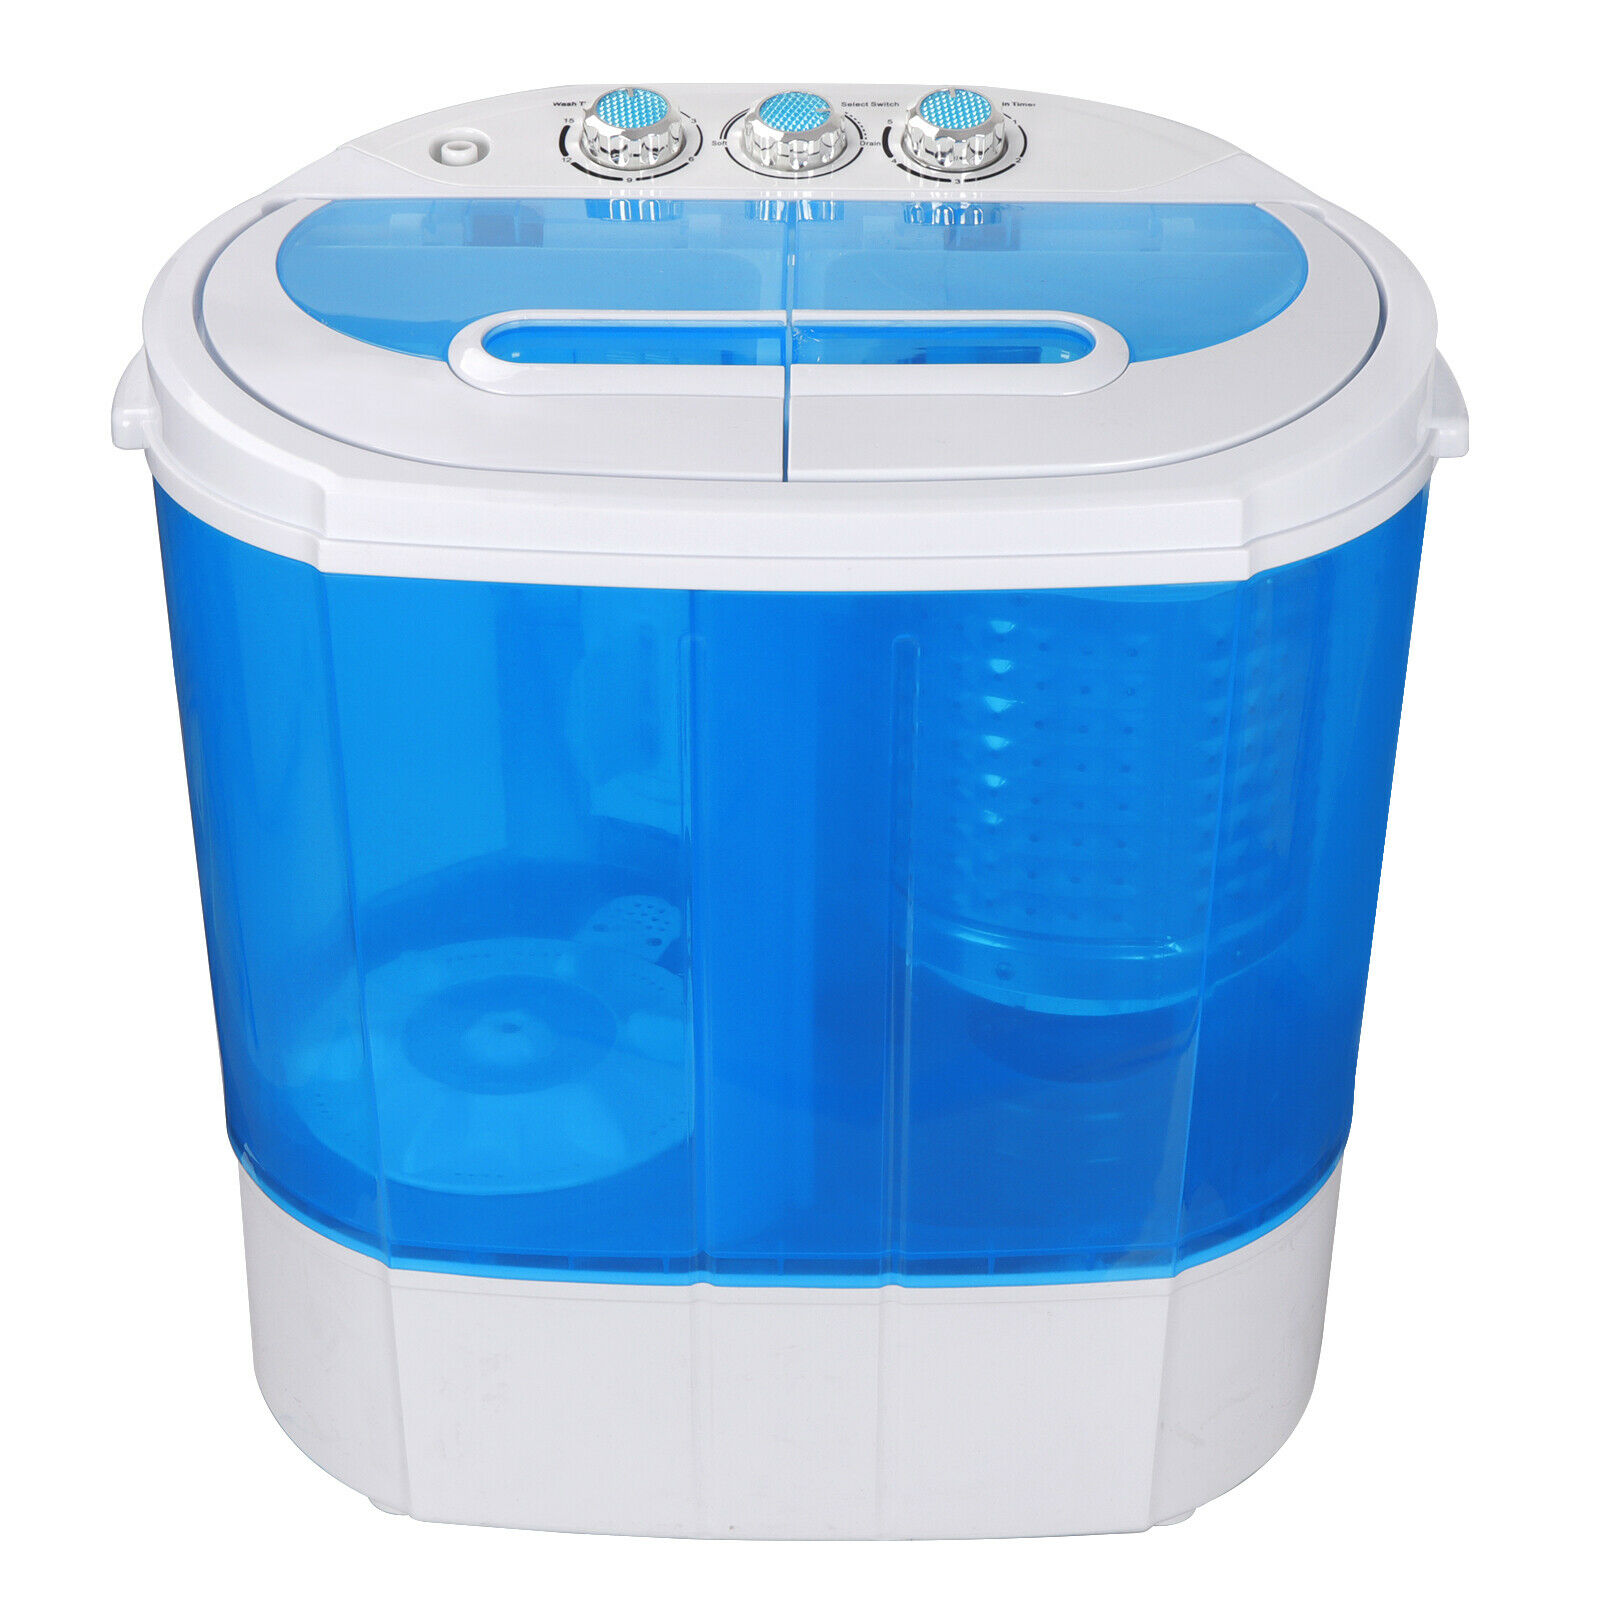 10lbs Mini Portable Compact Washing Machine Spin-dry Laundry Washer With Dryer